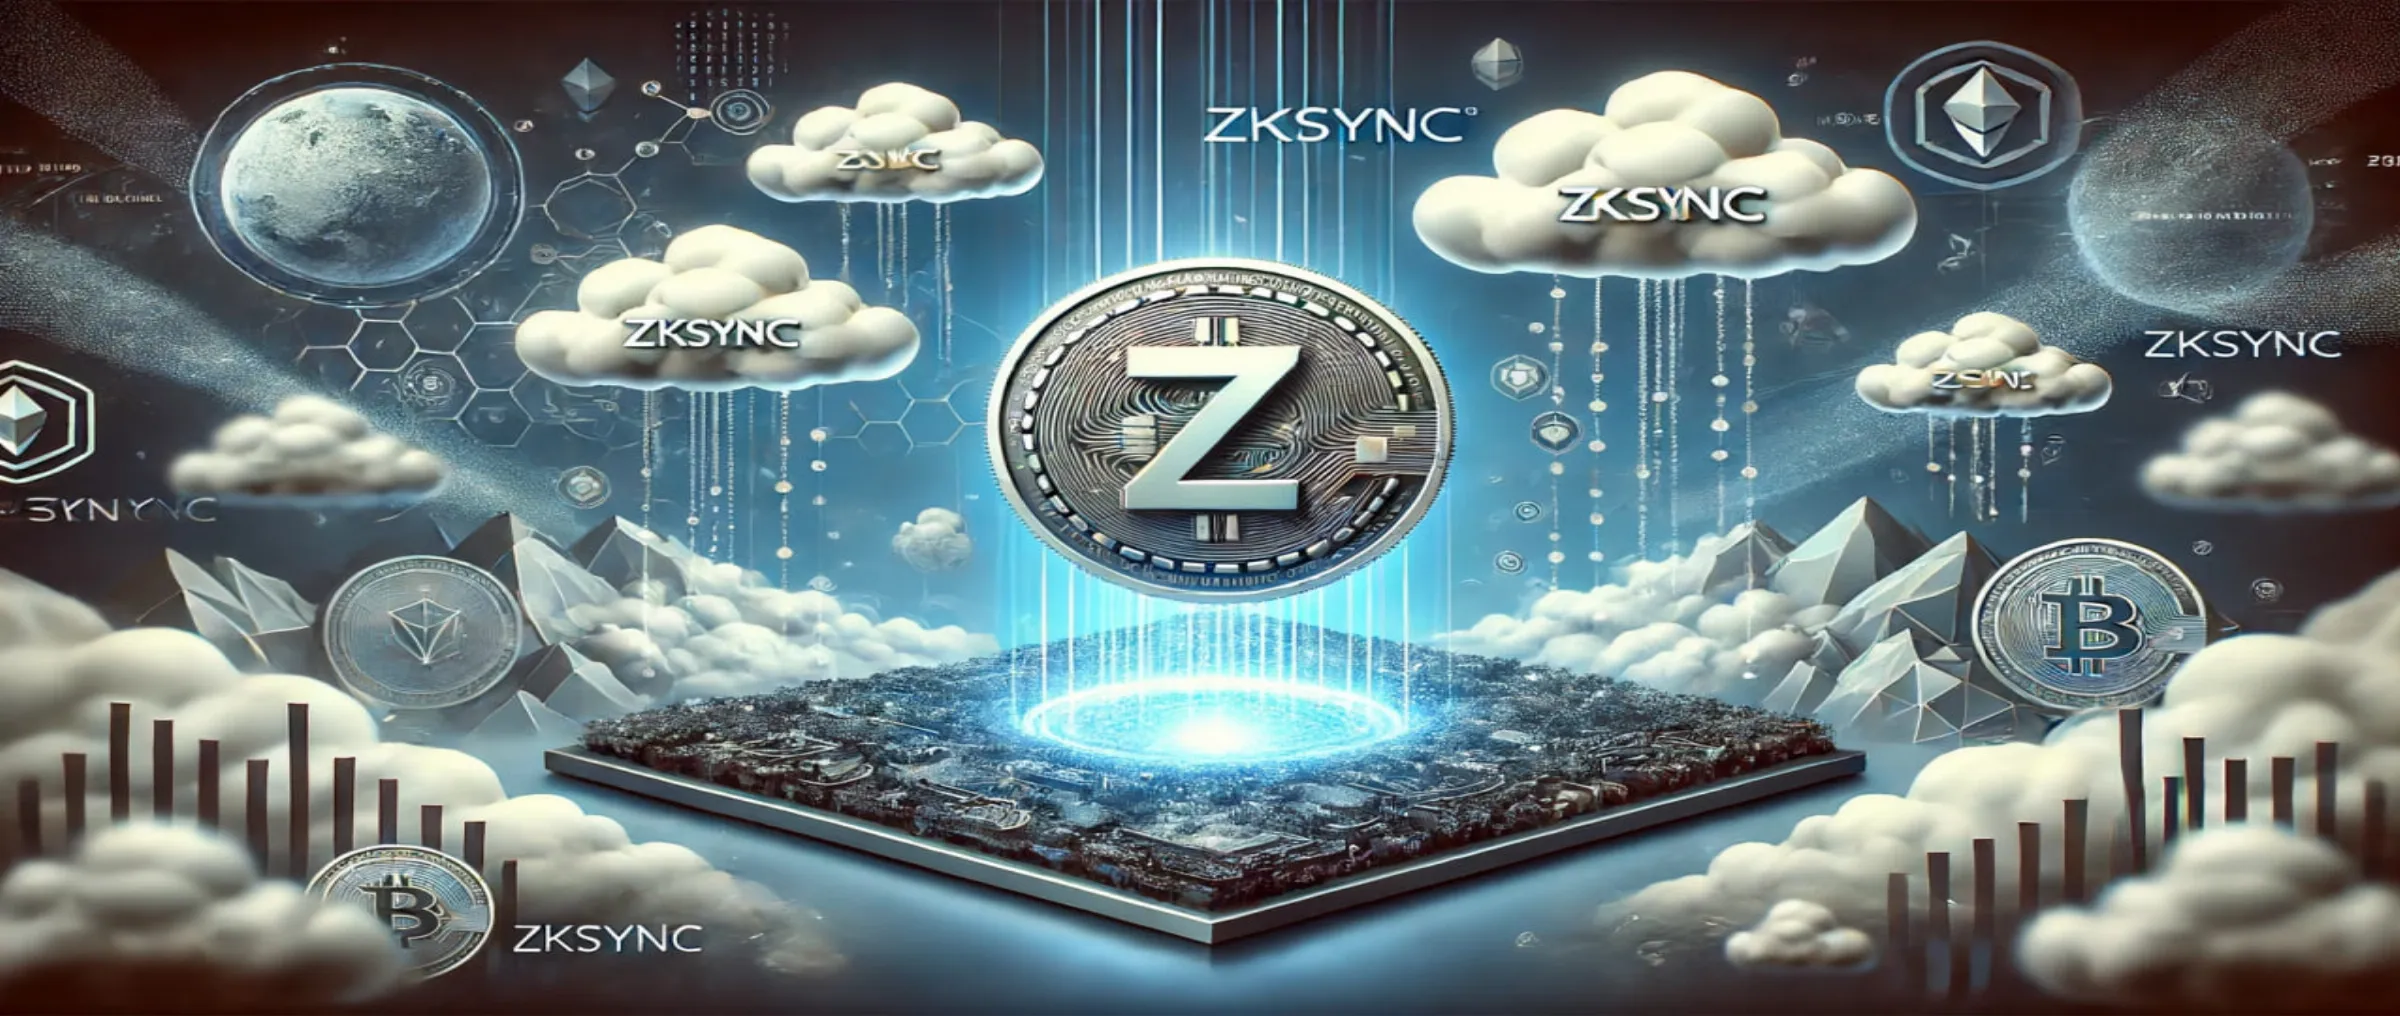 Over 40% of top zkSync airdrop holders sold their tokens, causing a 31% drop in price